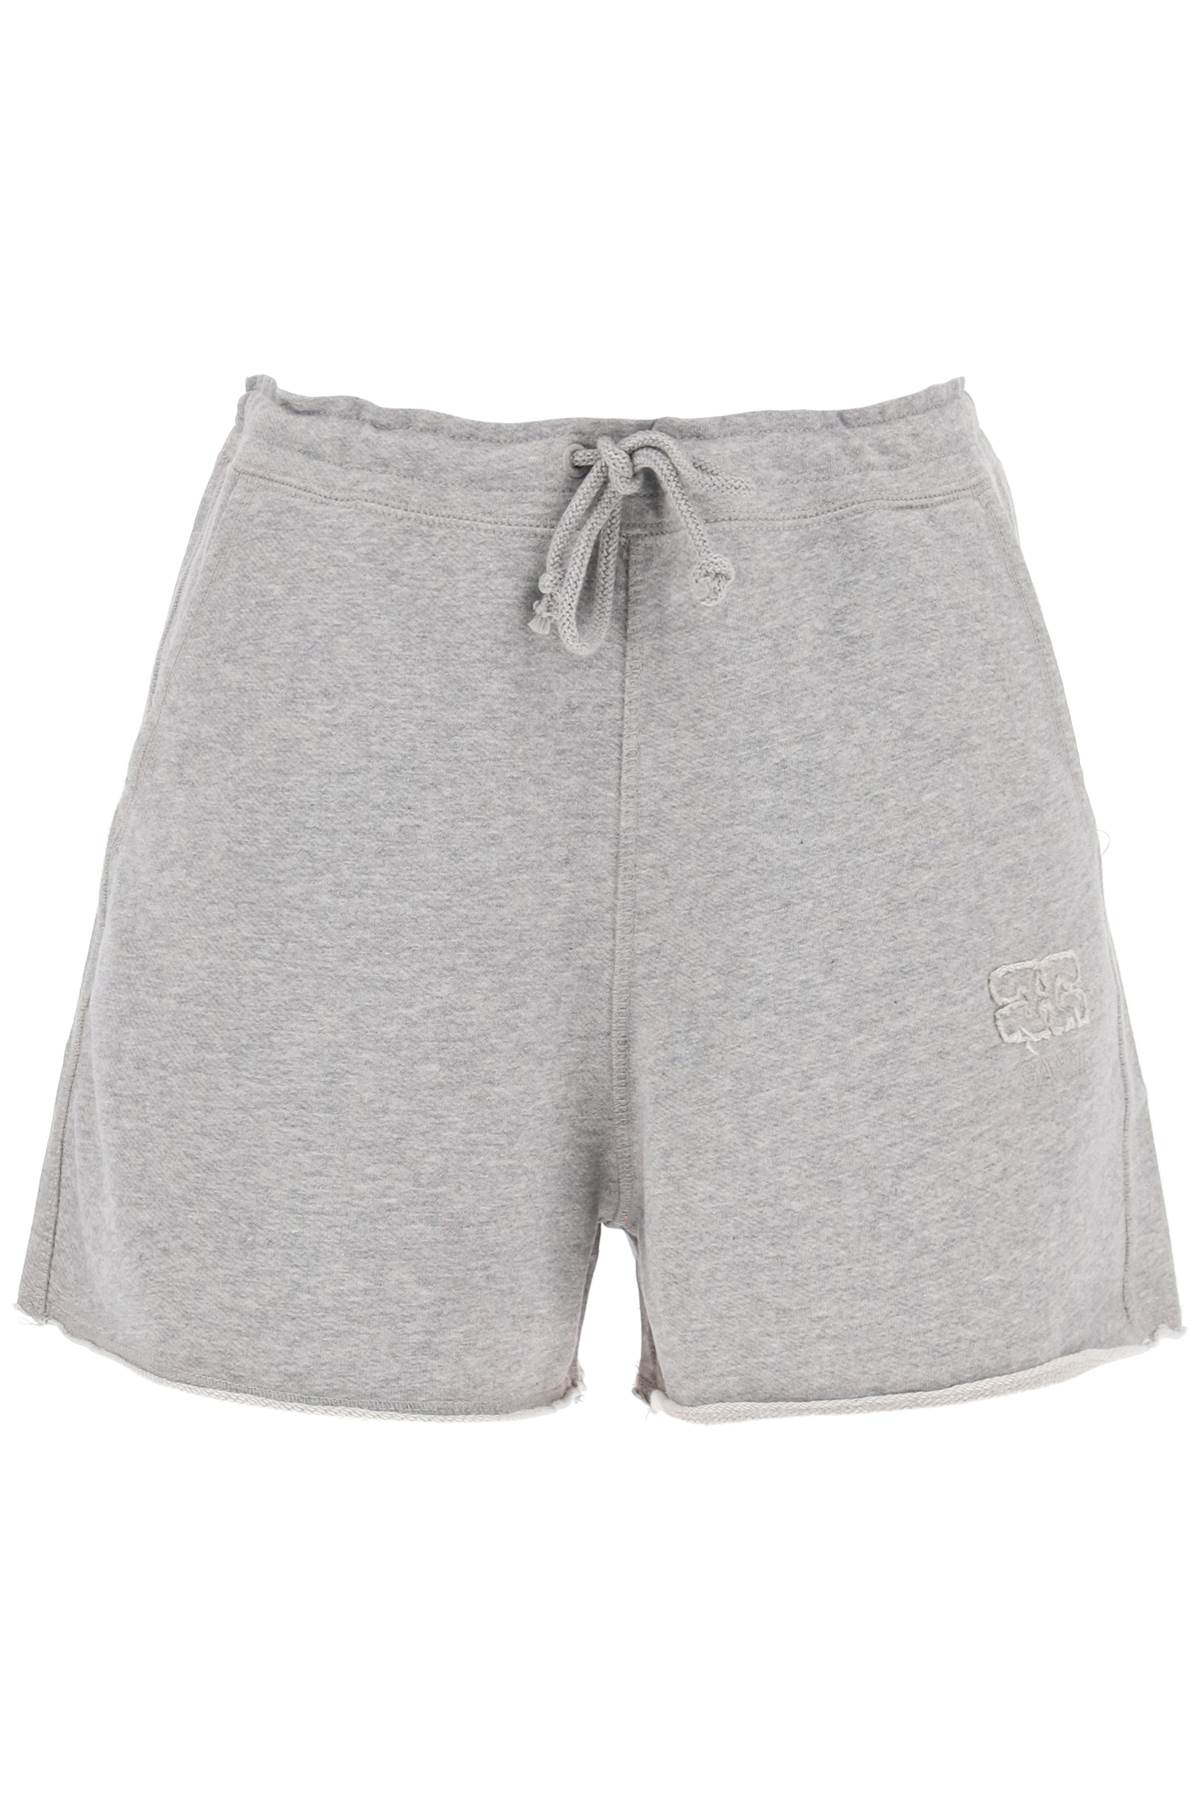 Sweatshorts In Cotton French Terry